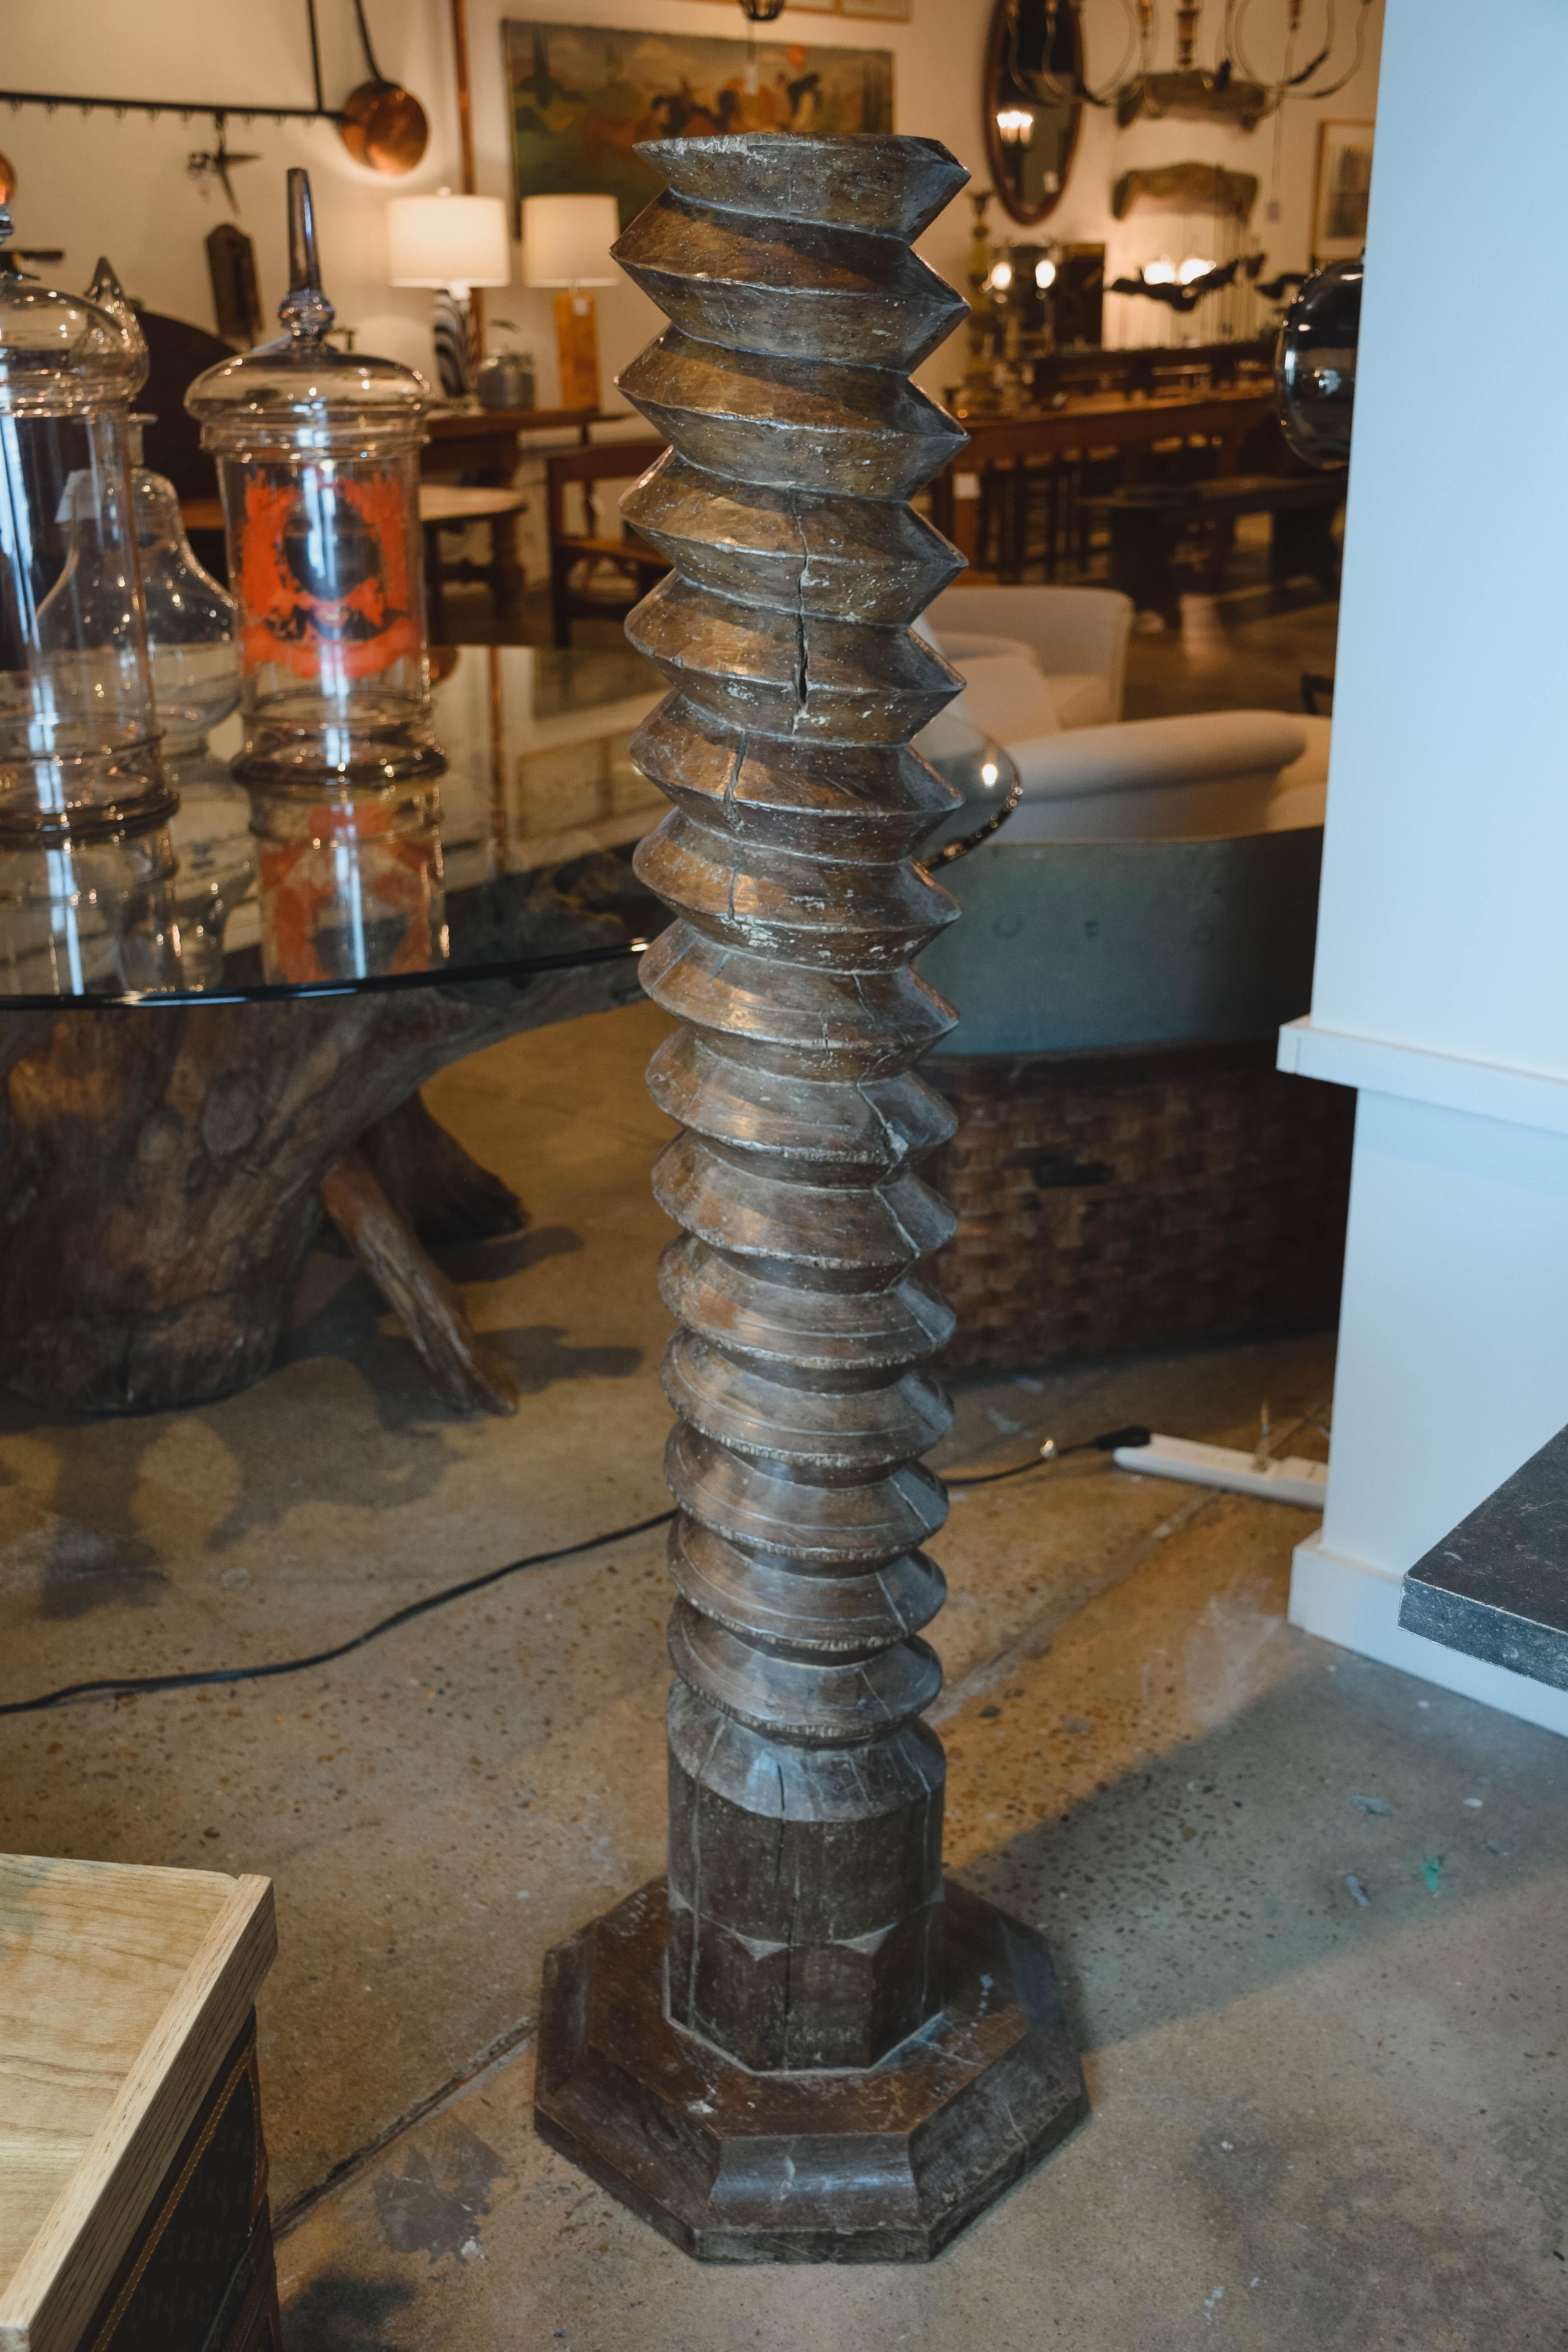 Found in France, this Provincial winepress screw was handmade in the 18th century. This beautifully worn and aged piece of history was an integral part of the mechanical screw wine press used by vintners to remove juice from crushed grapes during